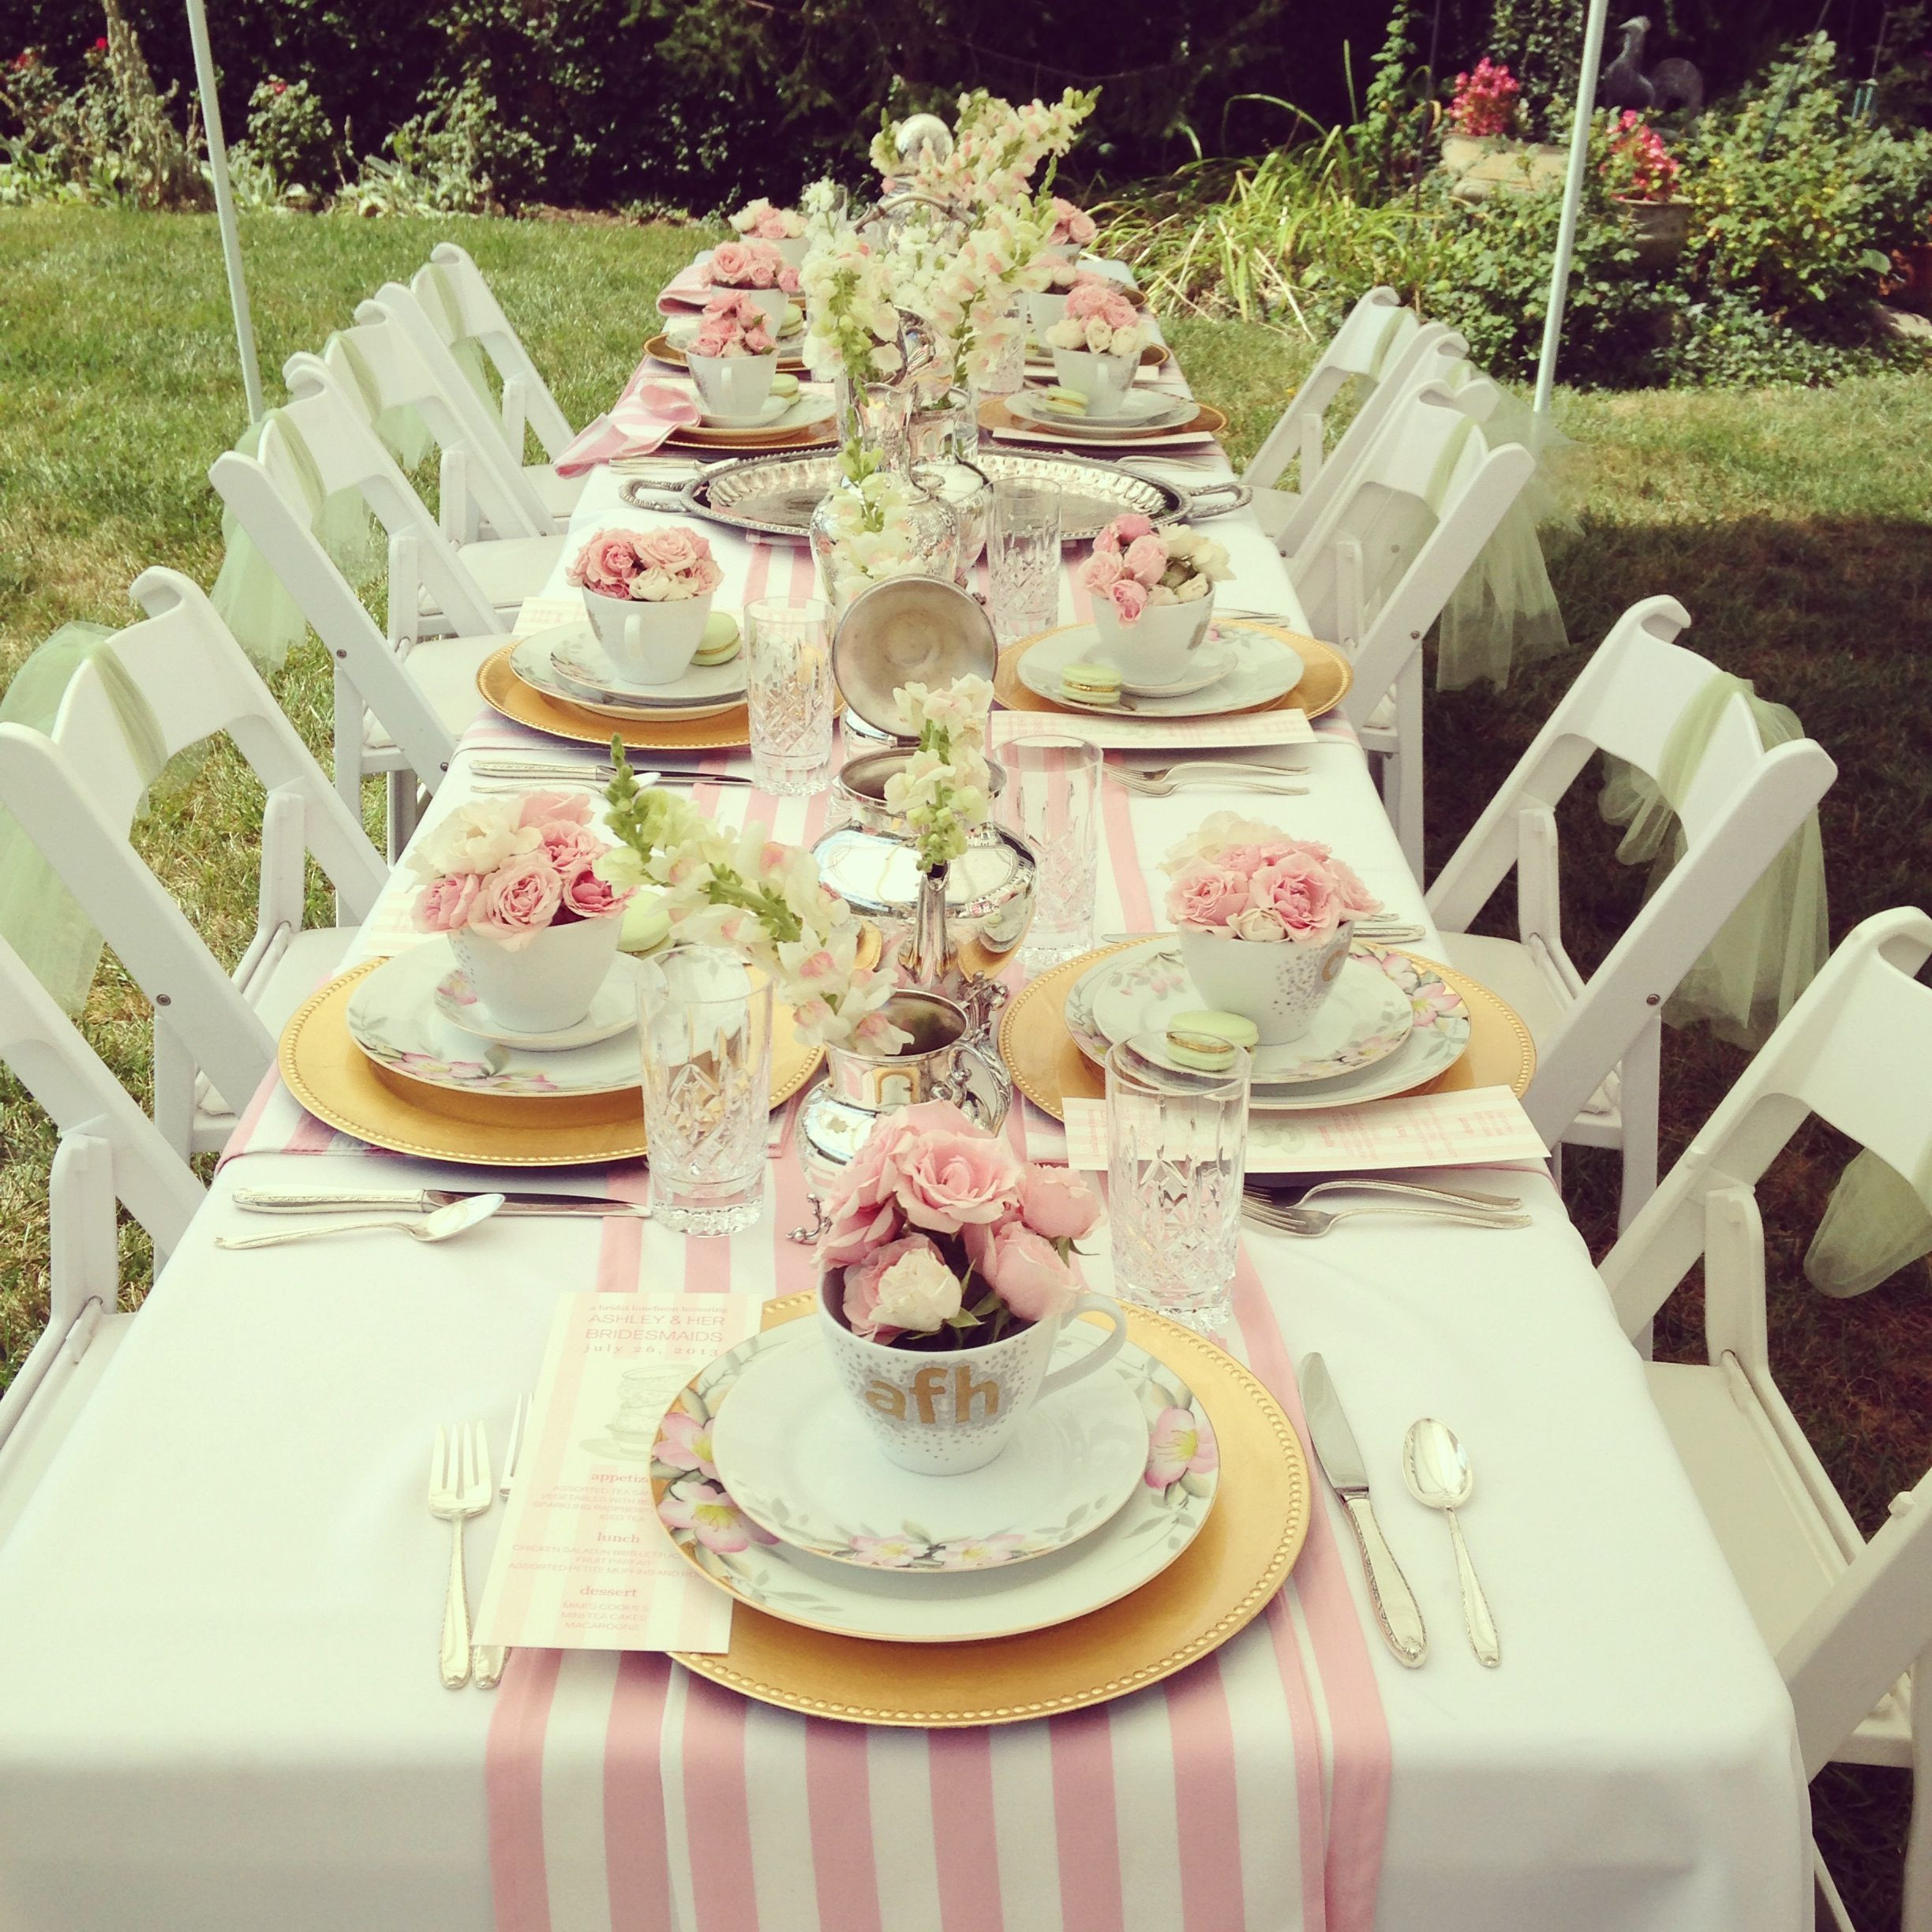 Bridal Shower Tea Party Decorating Ideas
 bridesmaids luncheon Tabletops that rock